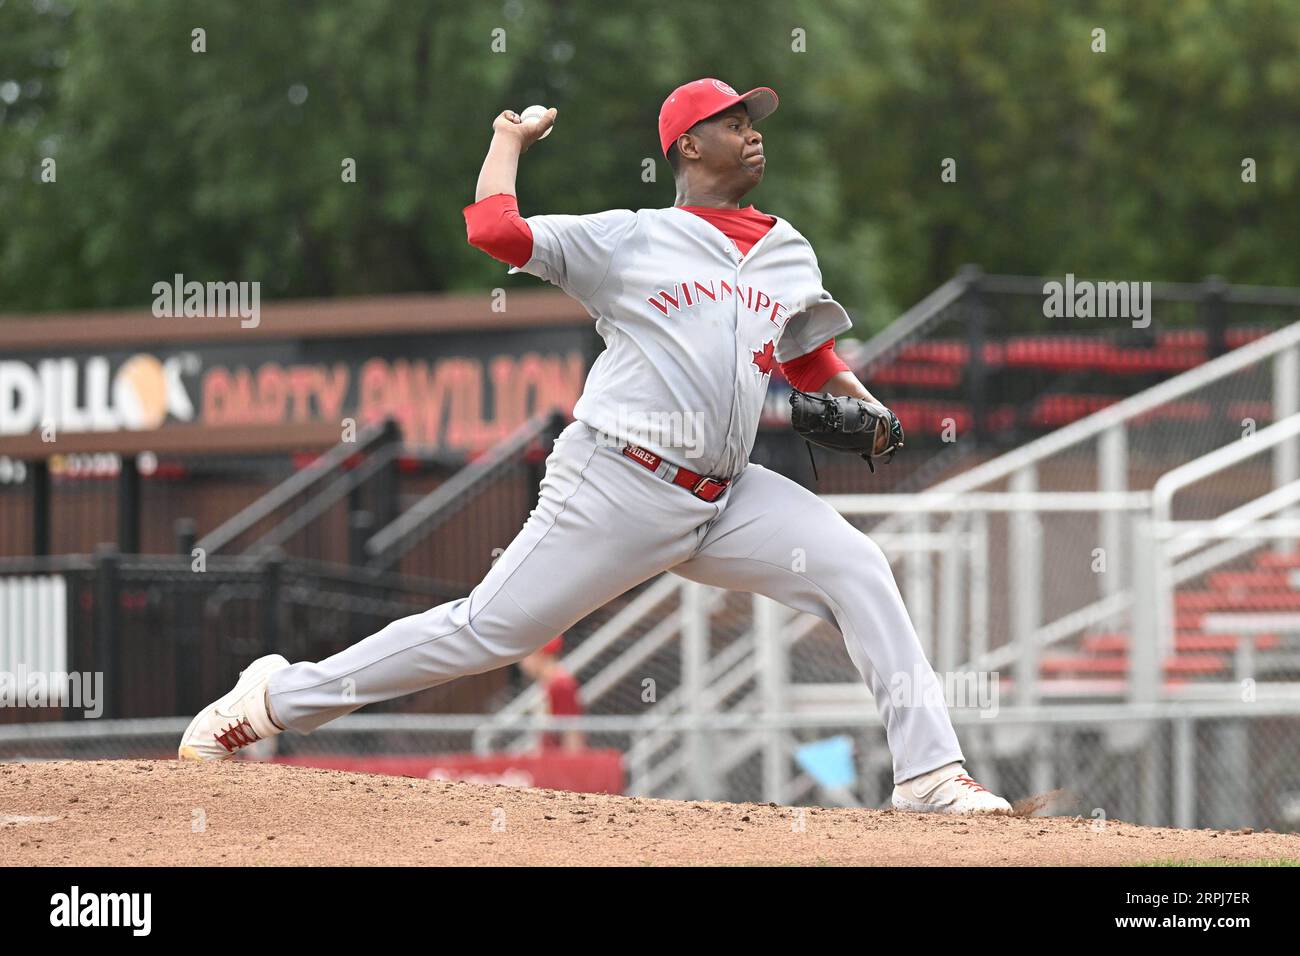 Winnipeg Goldeyes pitcher Luis Ramirez (37) delivers a pitch during the FM Redhawks game against the Winnipeg Goldeyes in American Association professional baseball at Newman Outdoor Field in Fargo, ND on Sunday, September 4, 2023. Winnipeg won 7-2. Photo by Russell Hons/CSM. Stock Photo